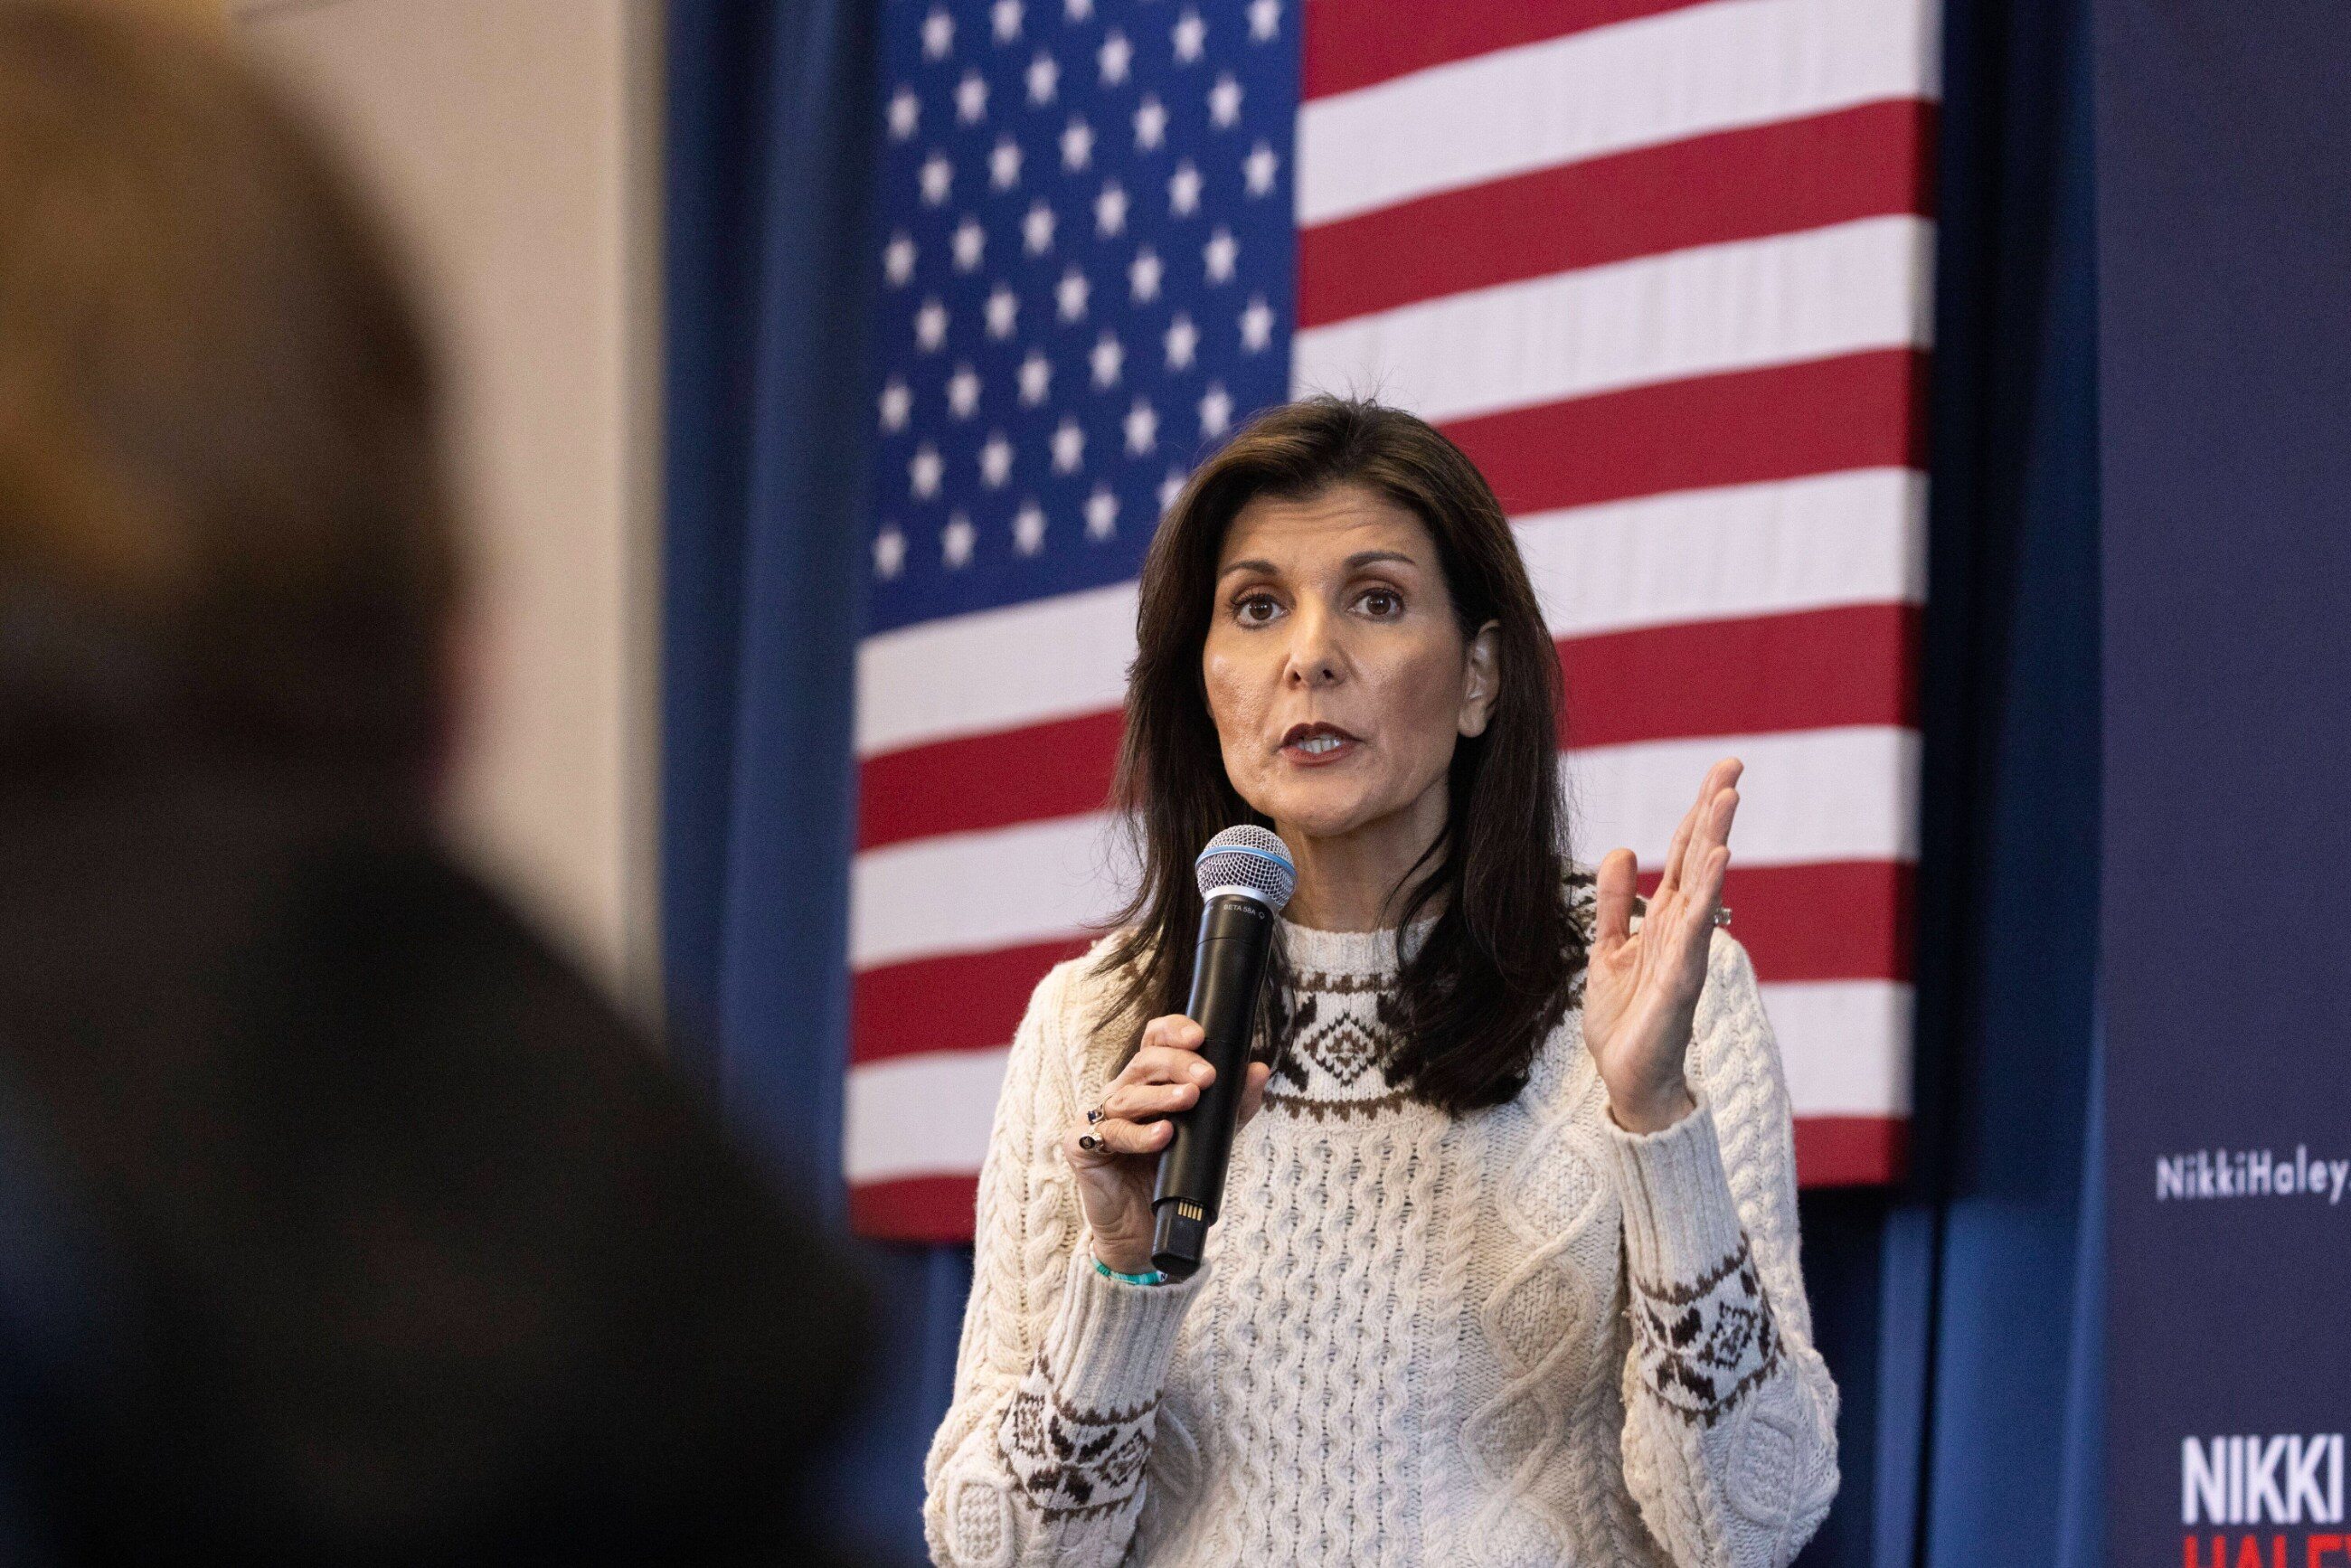 United States of America.  Nikki Haley won the District of Columbia primary